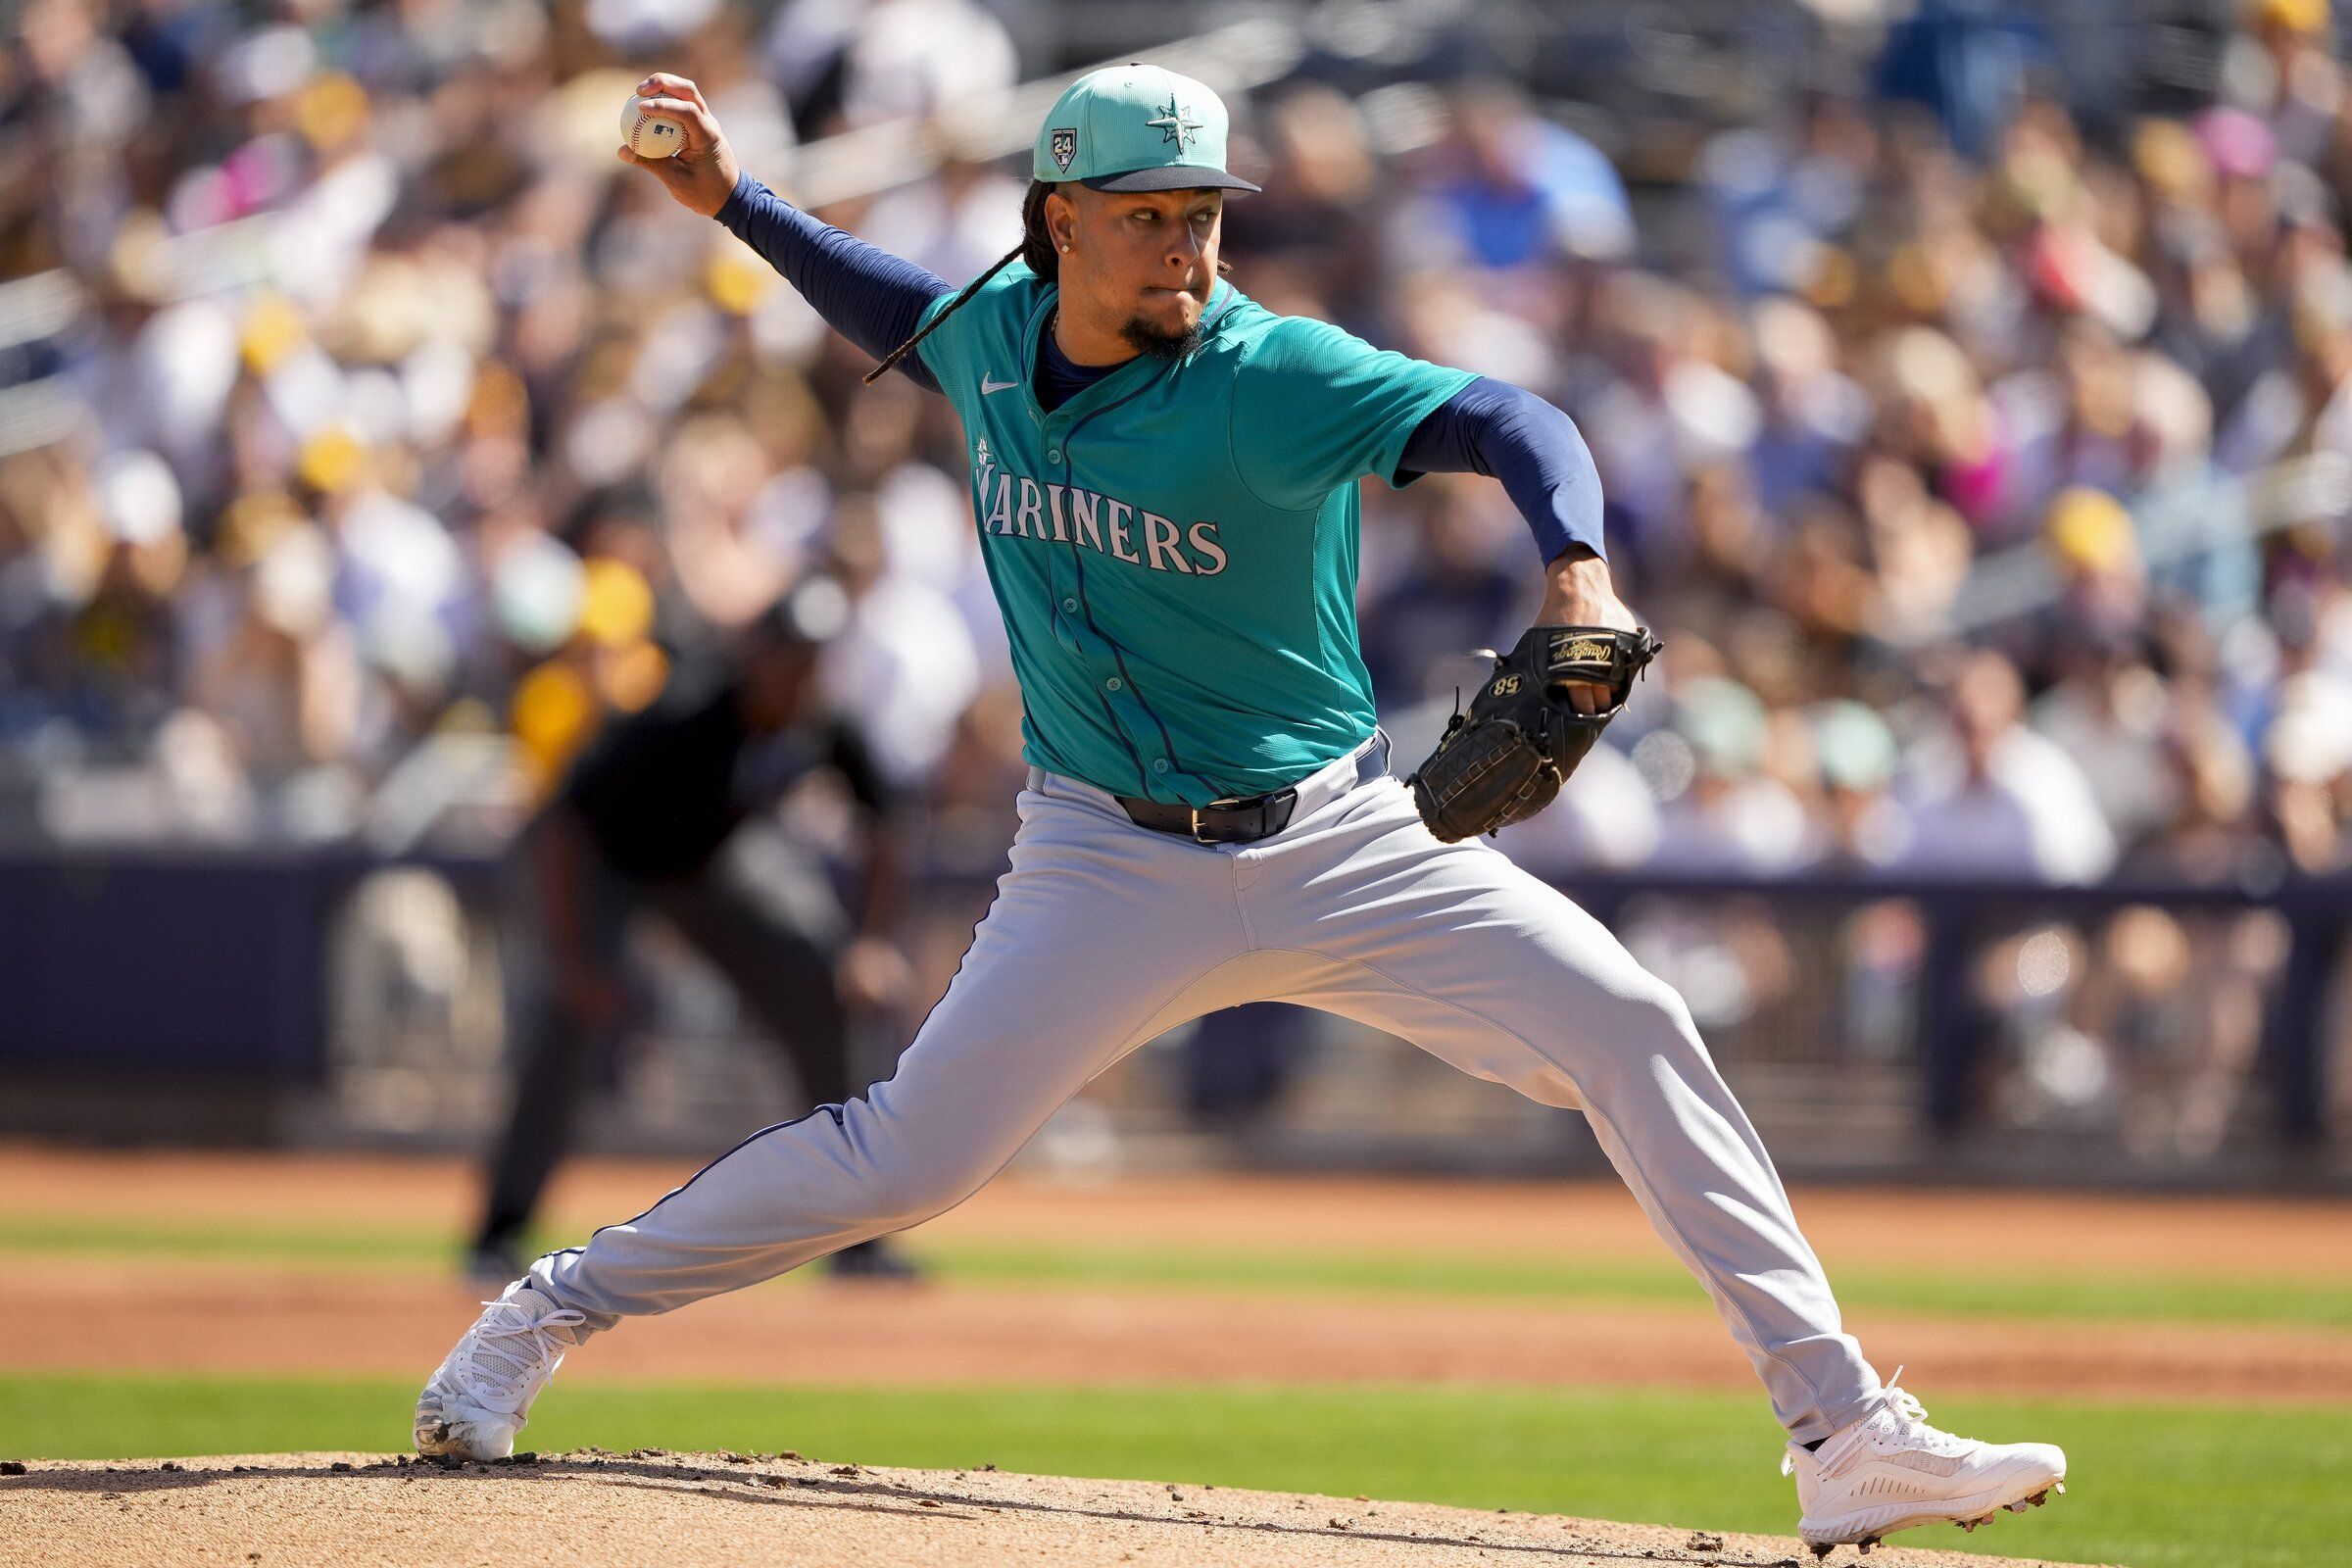 Mariners pitchers get roughed up in loss to Padres | The Seattle Times